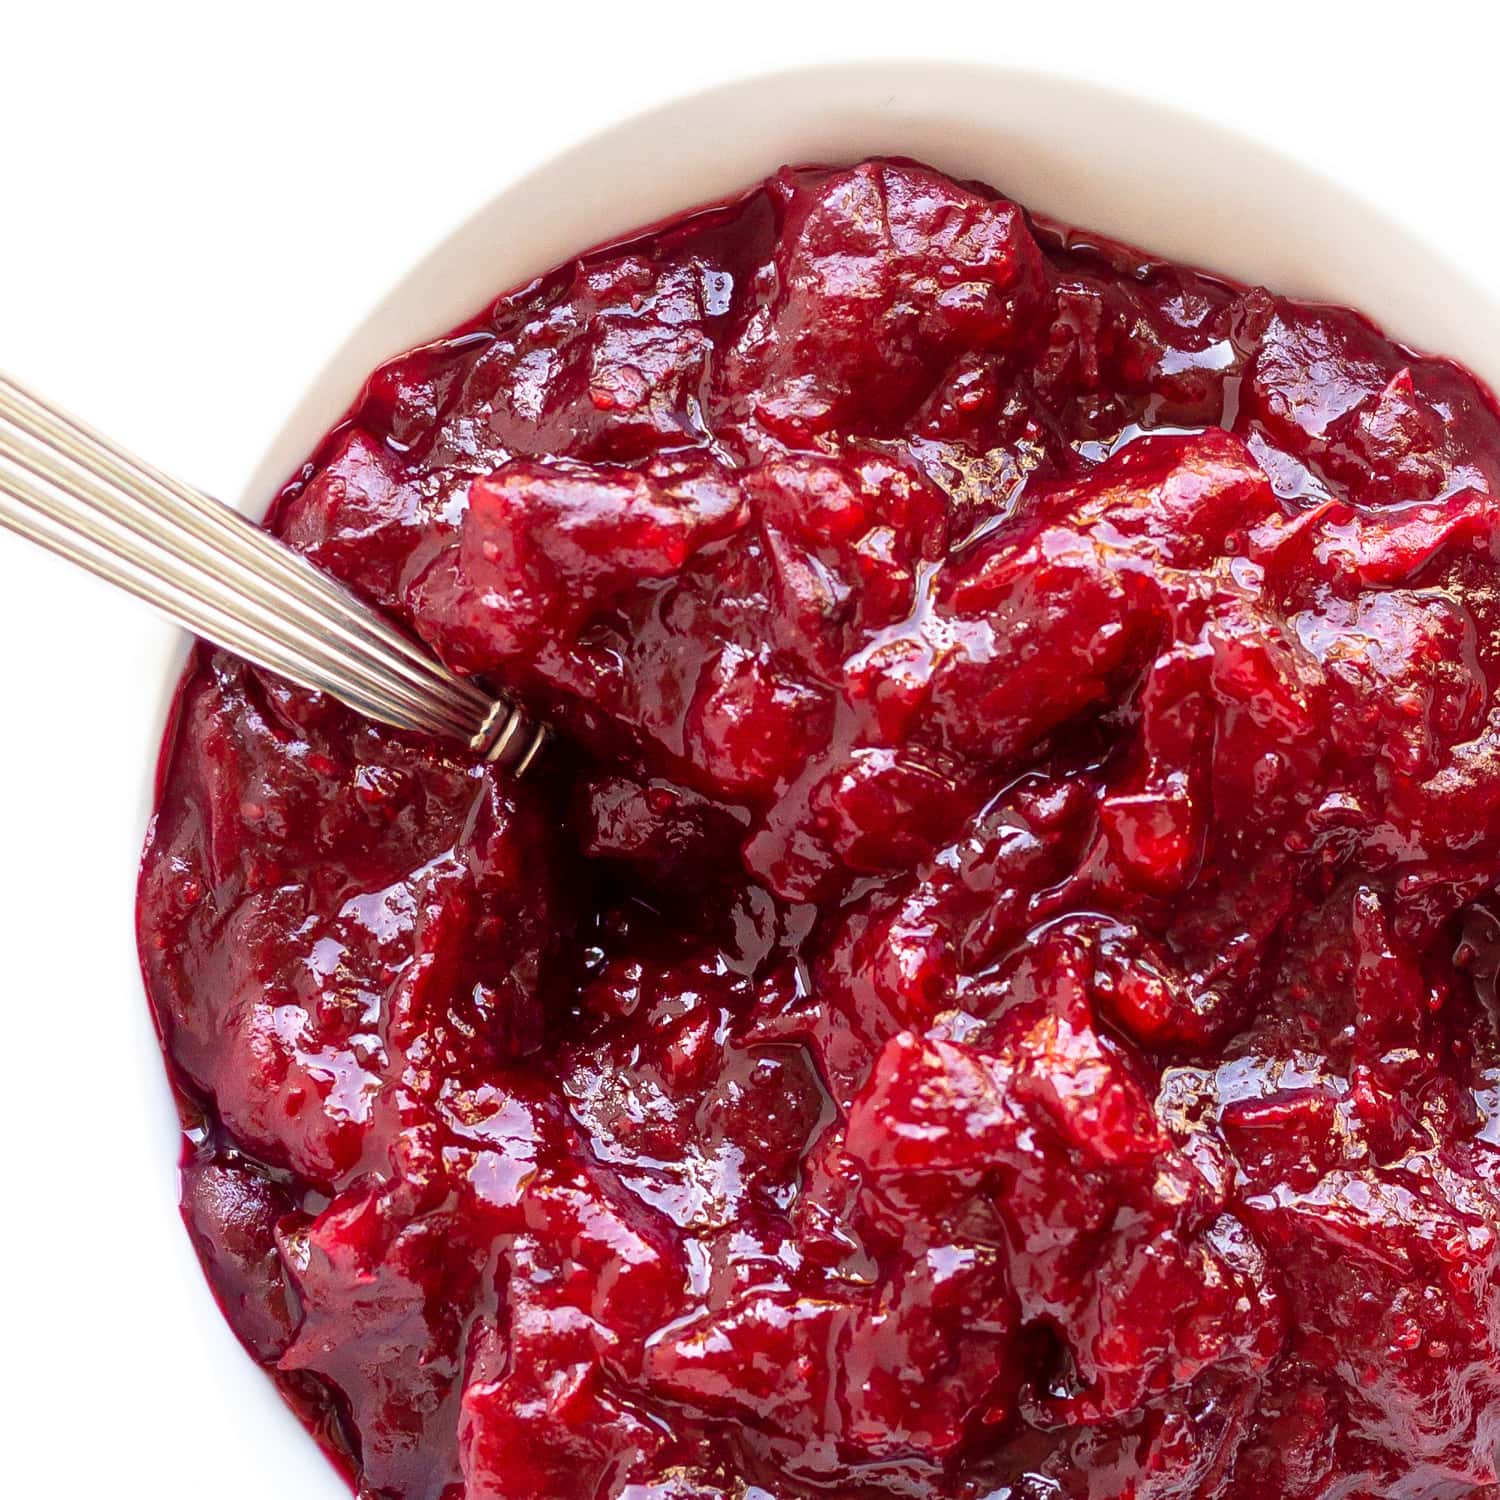 Homemade cranberry sauce in a white bowl with spoon.